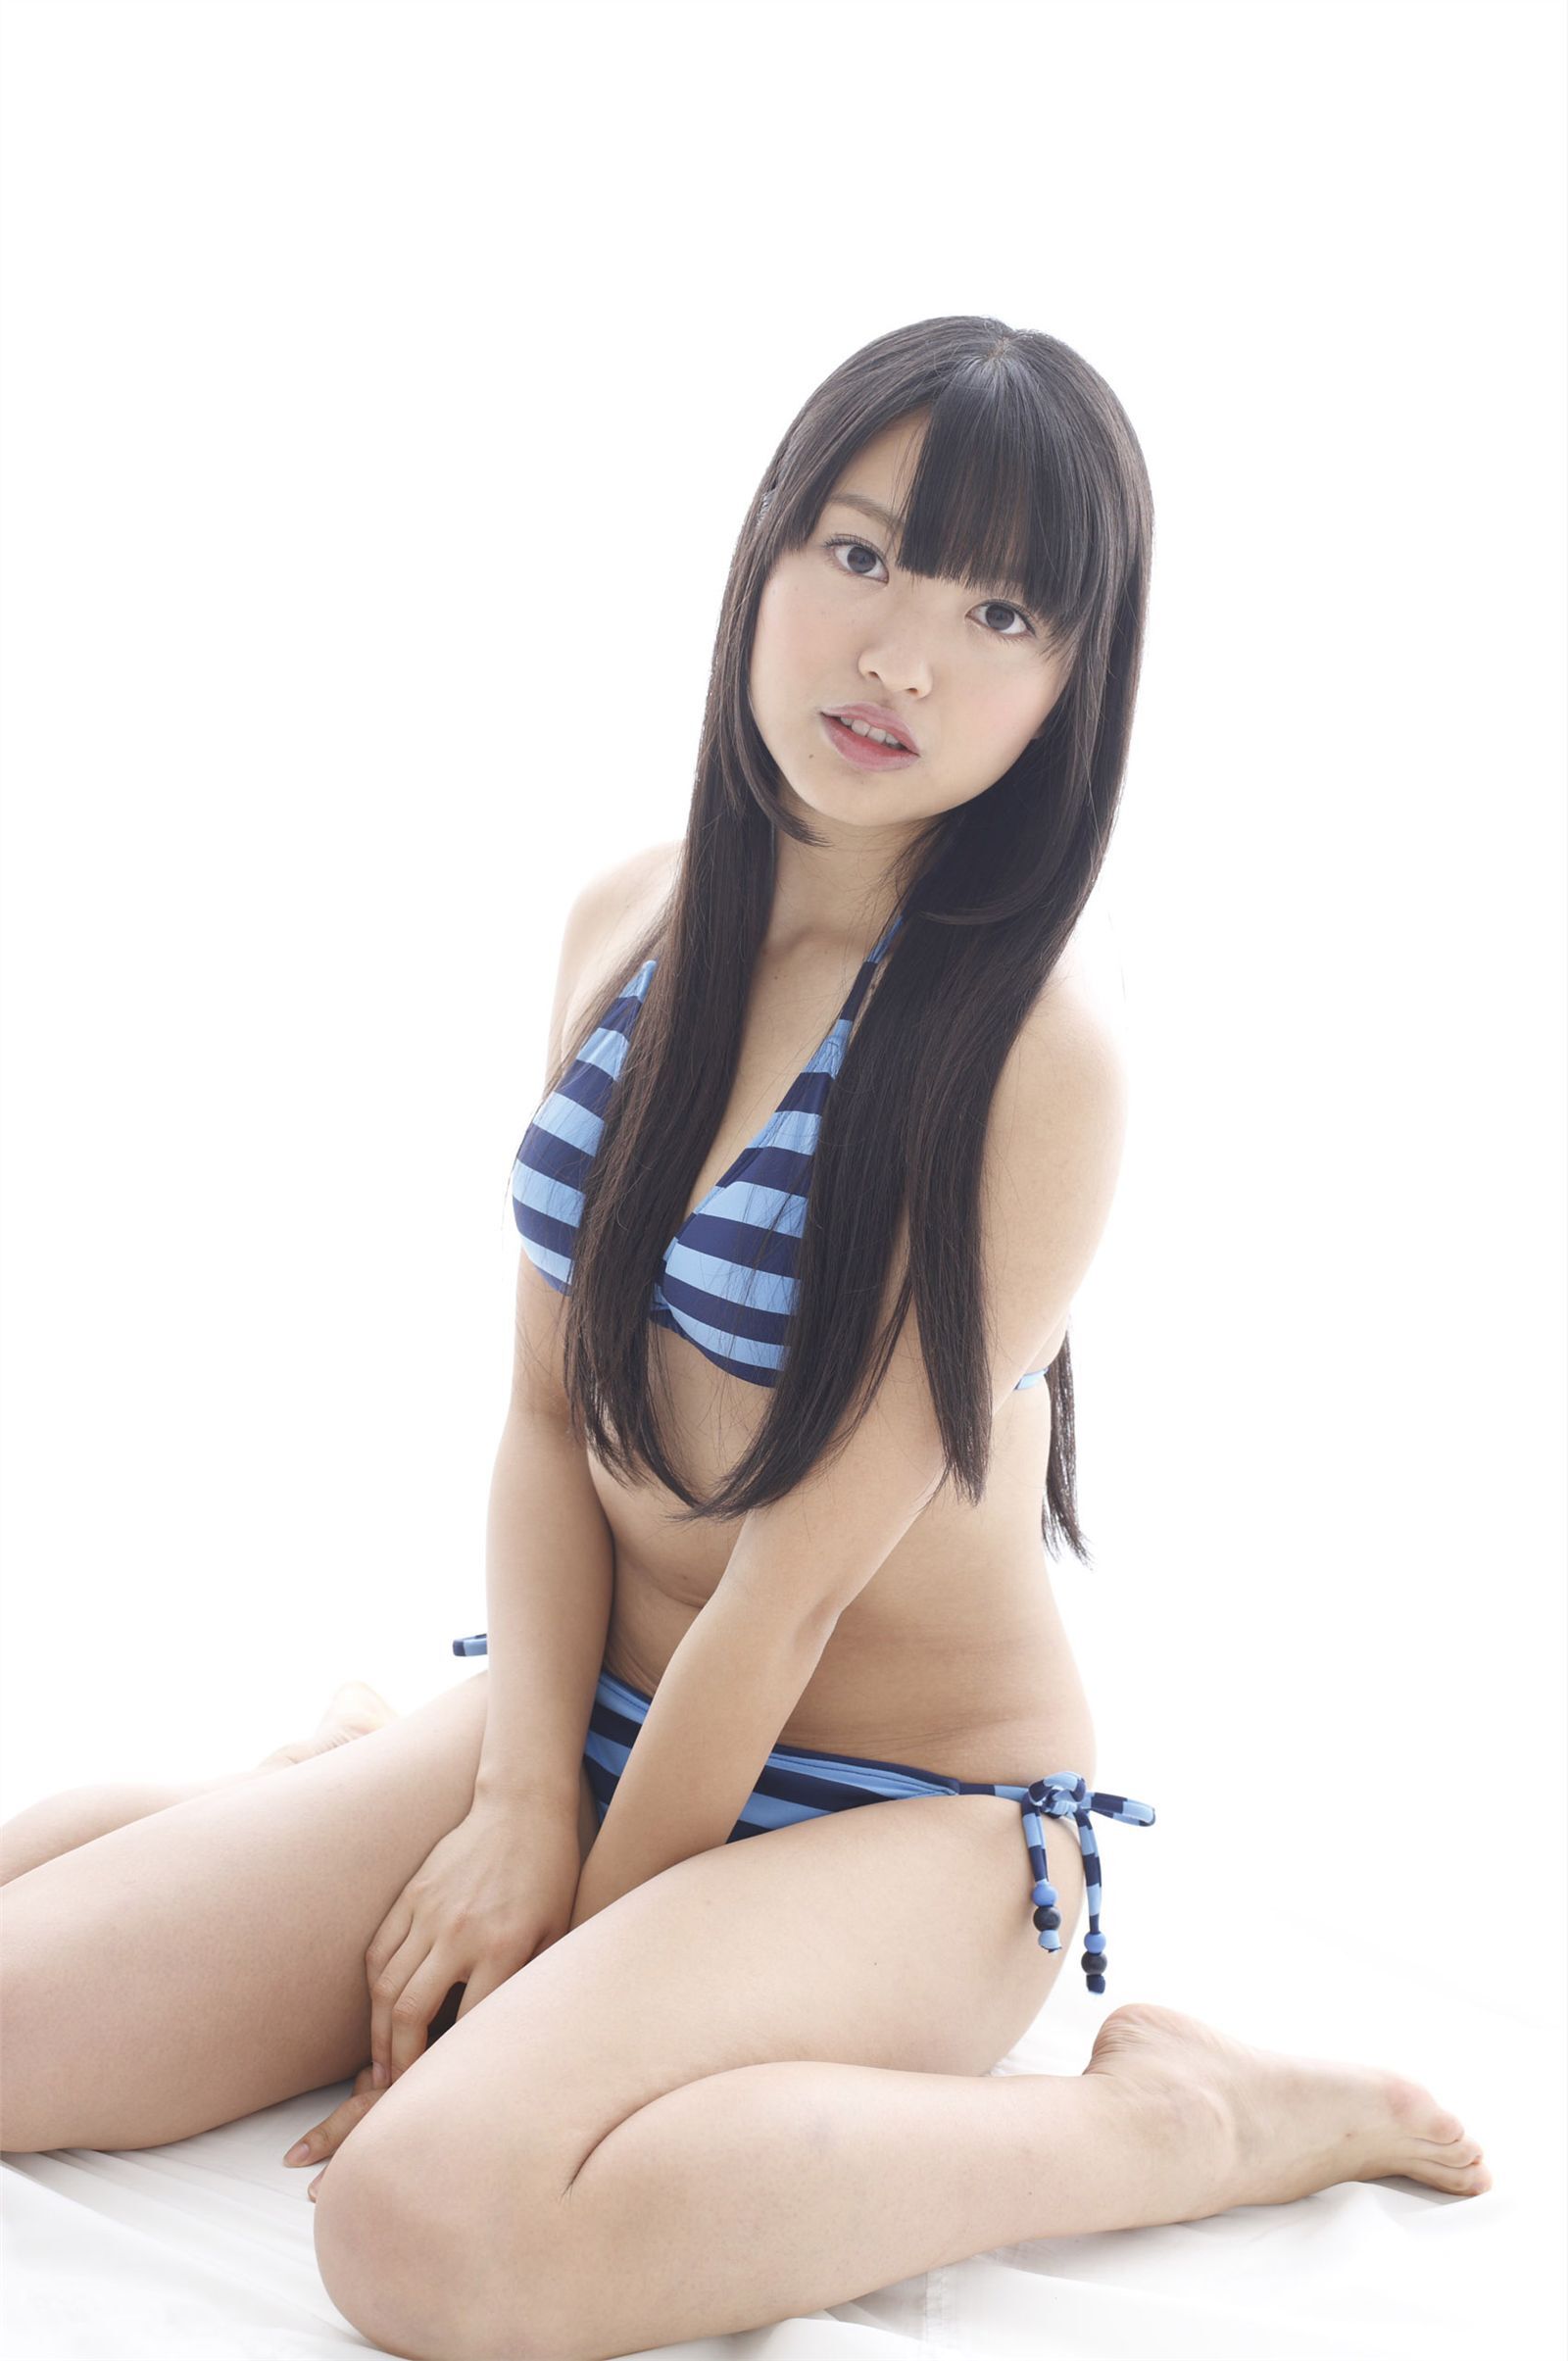 [WPB net] Japanese beauty picture 3 2013.01.30 No.135